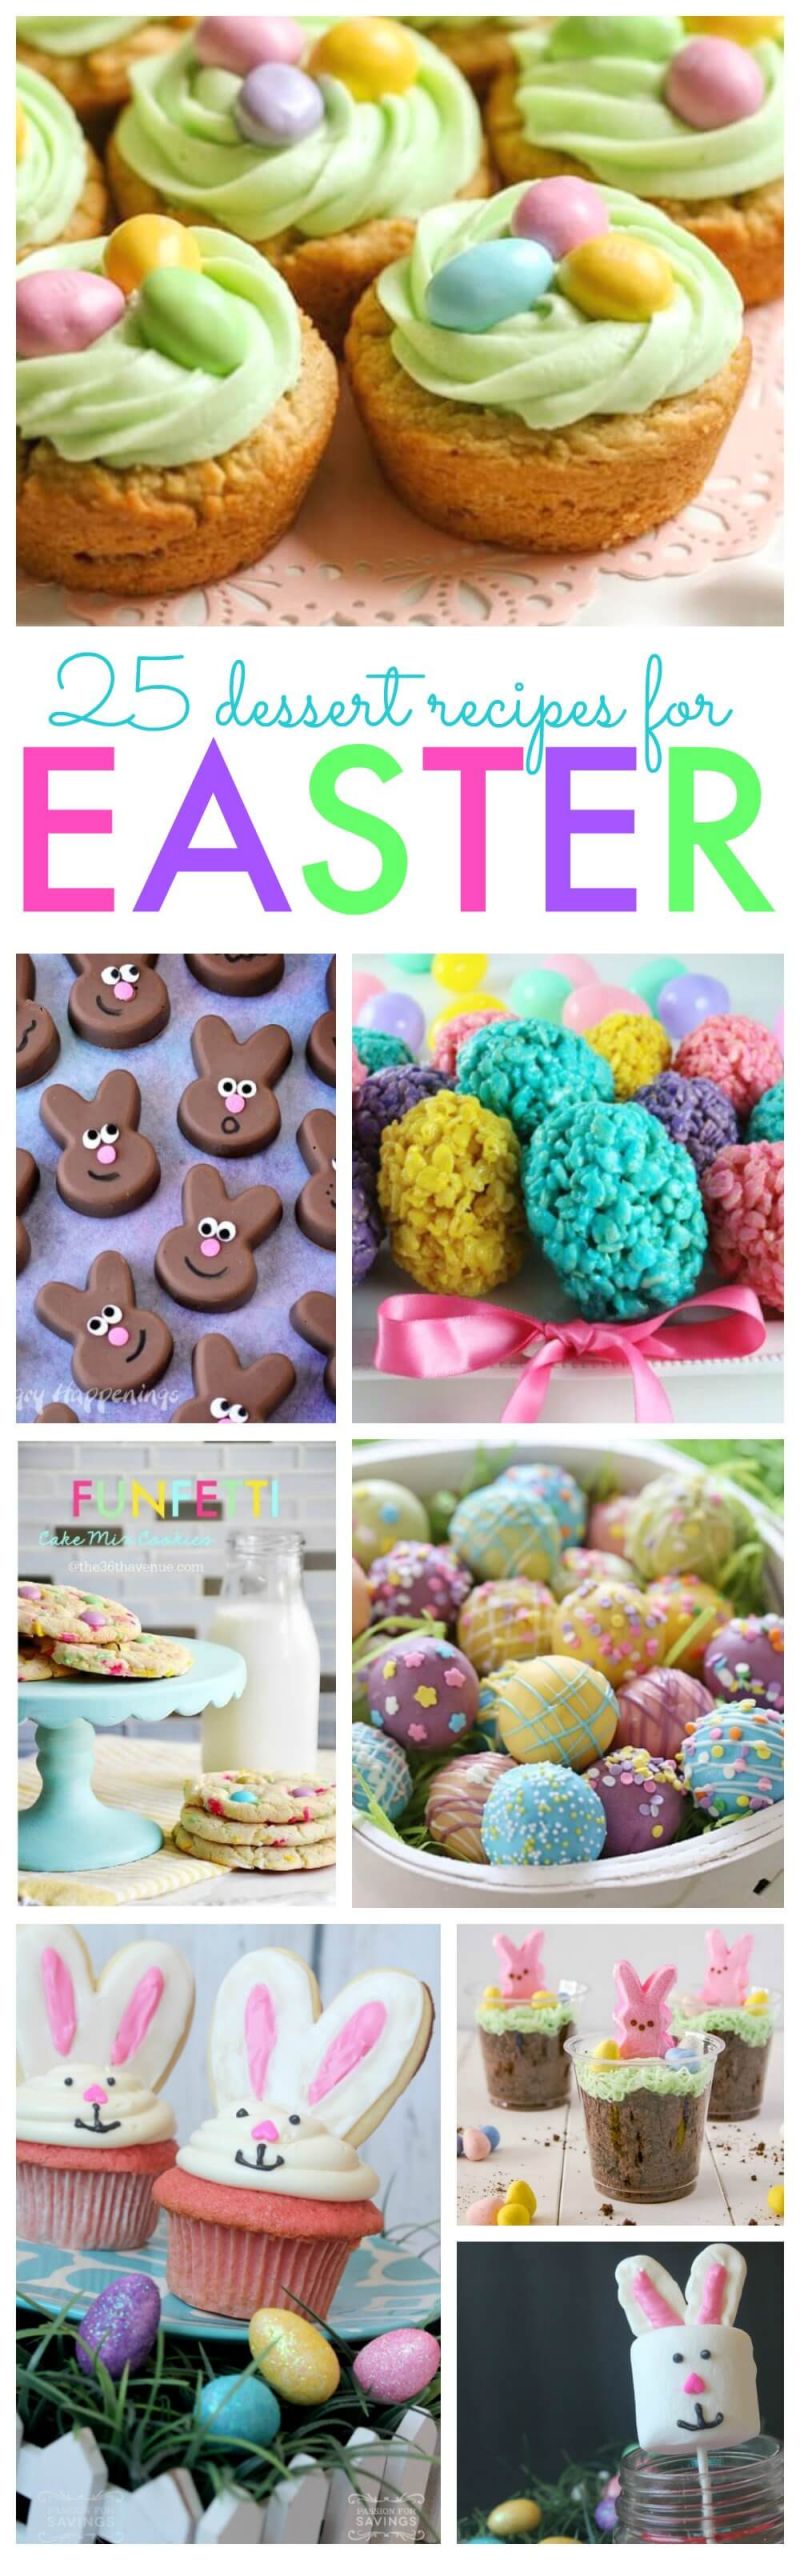 Easter Cooking Ideas
 Easter Desserts Your Family Will Love